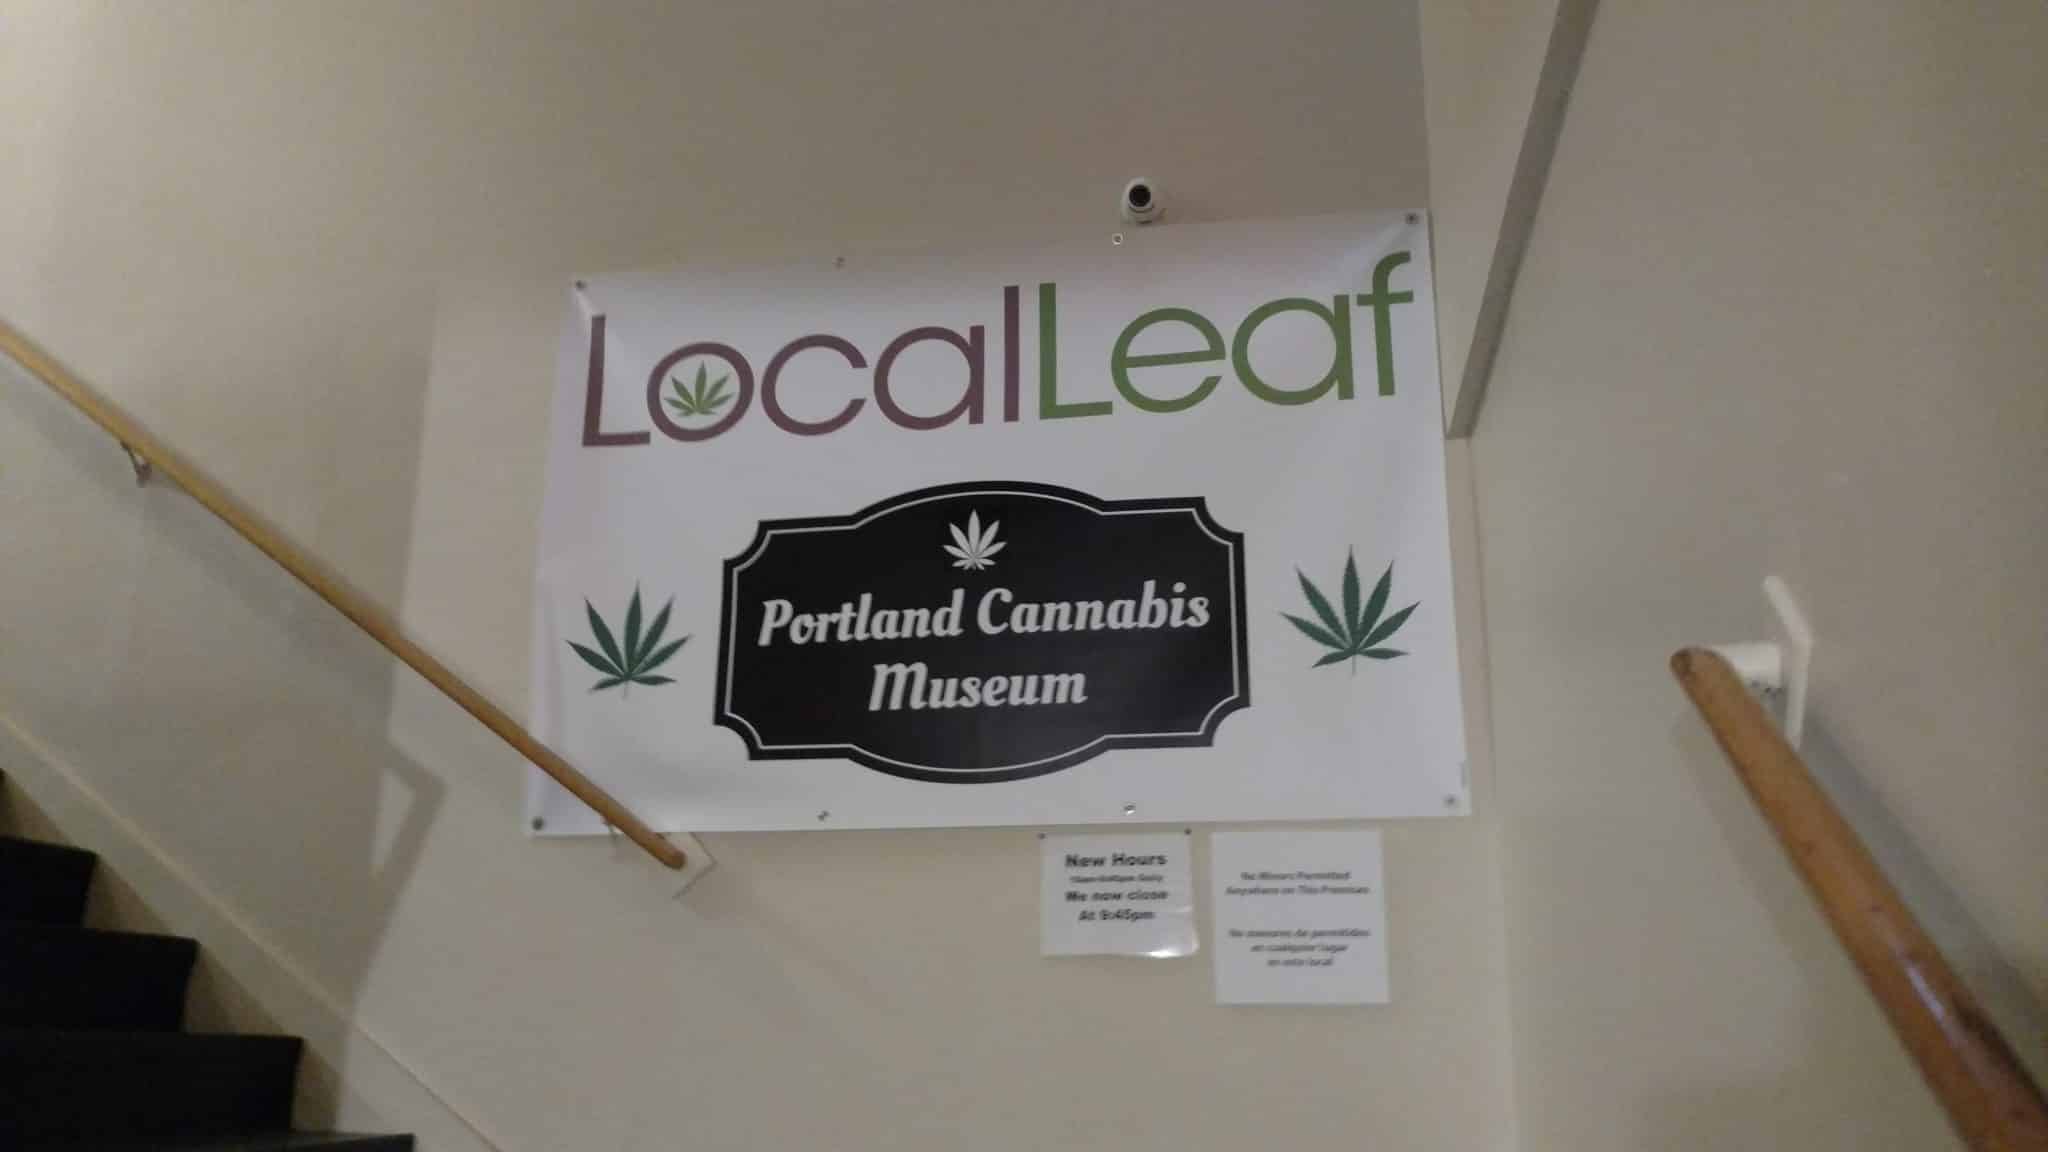 local leaf and my dispensary tour